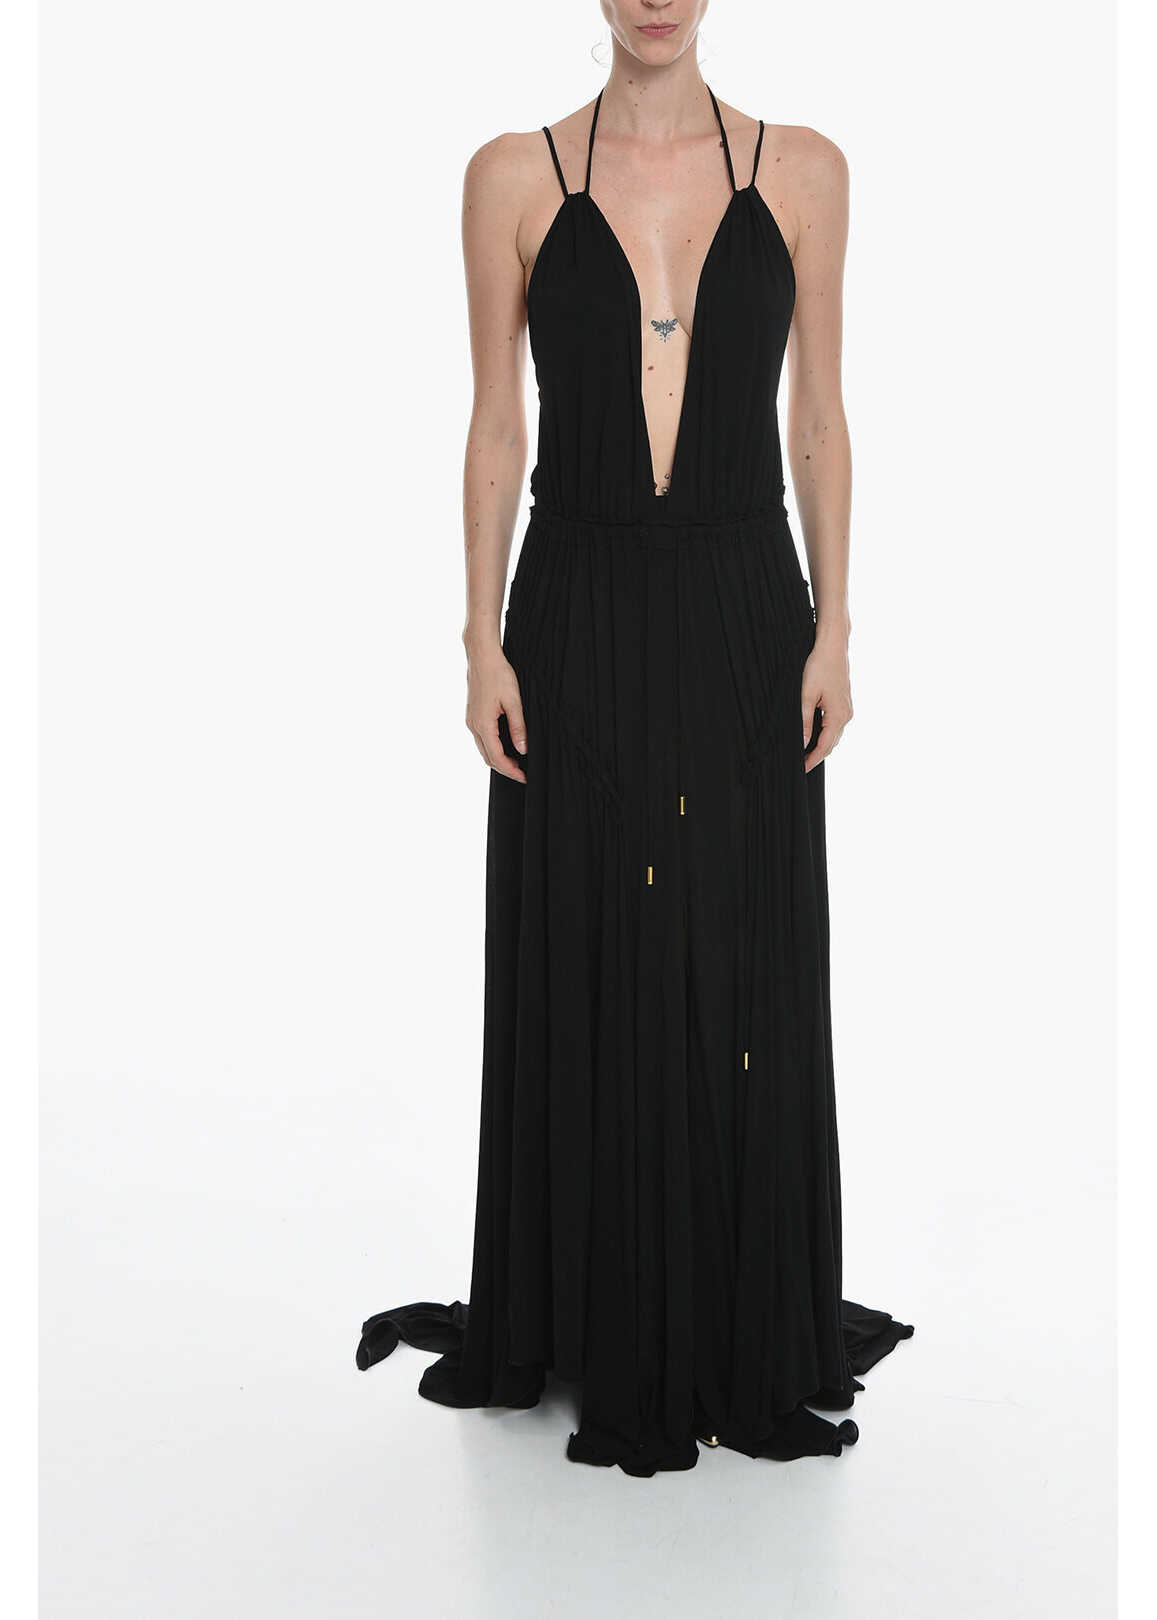 DSQUARED2 Backless Maxi Dress With Draping Black